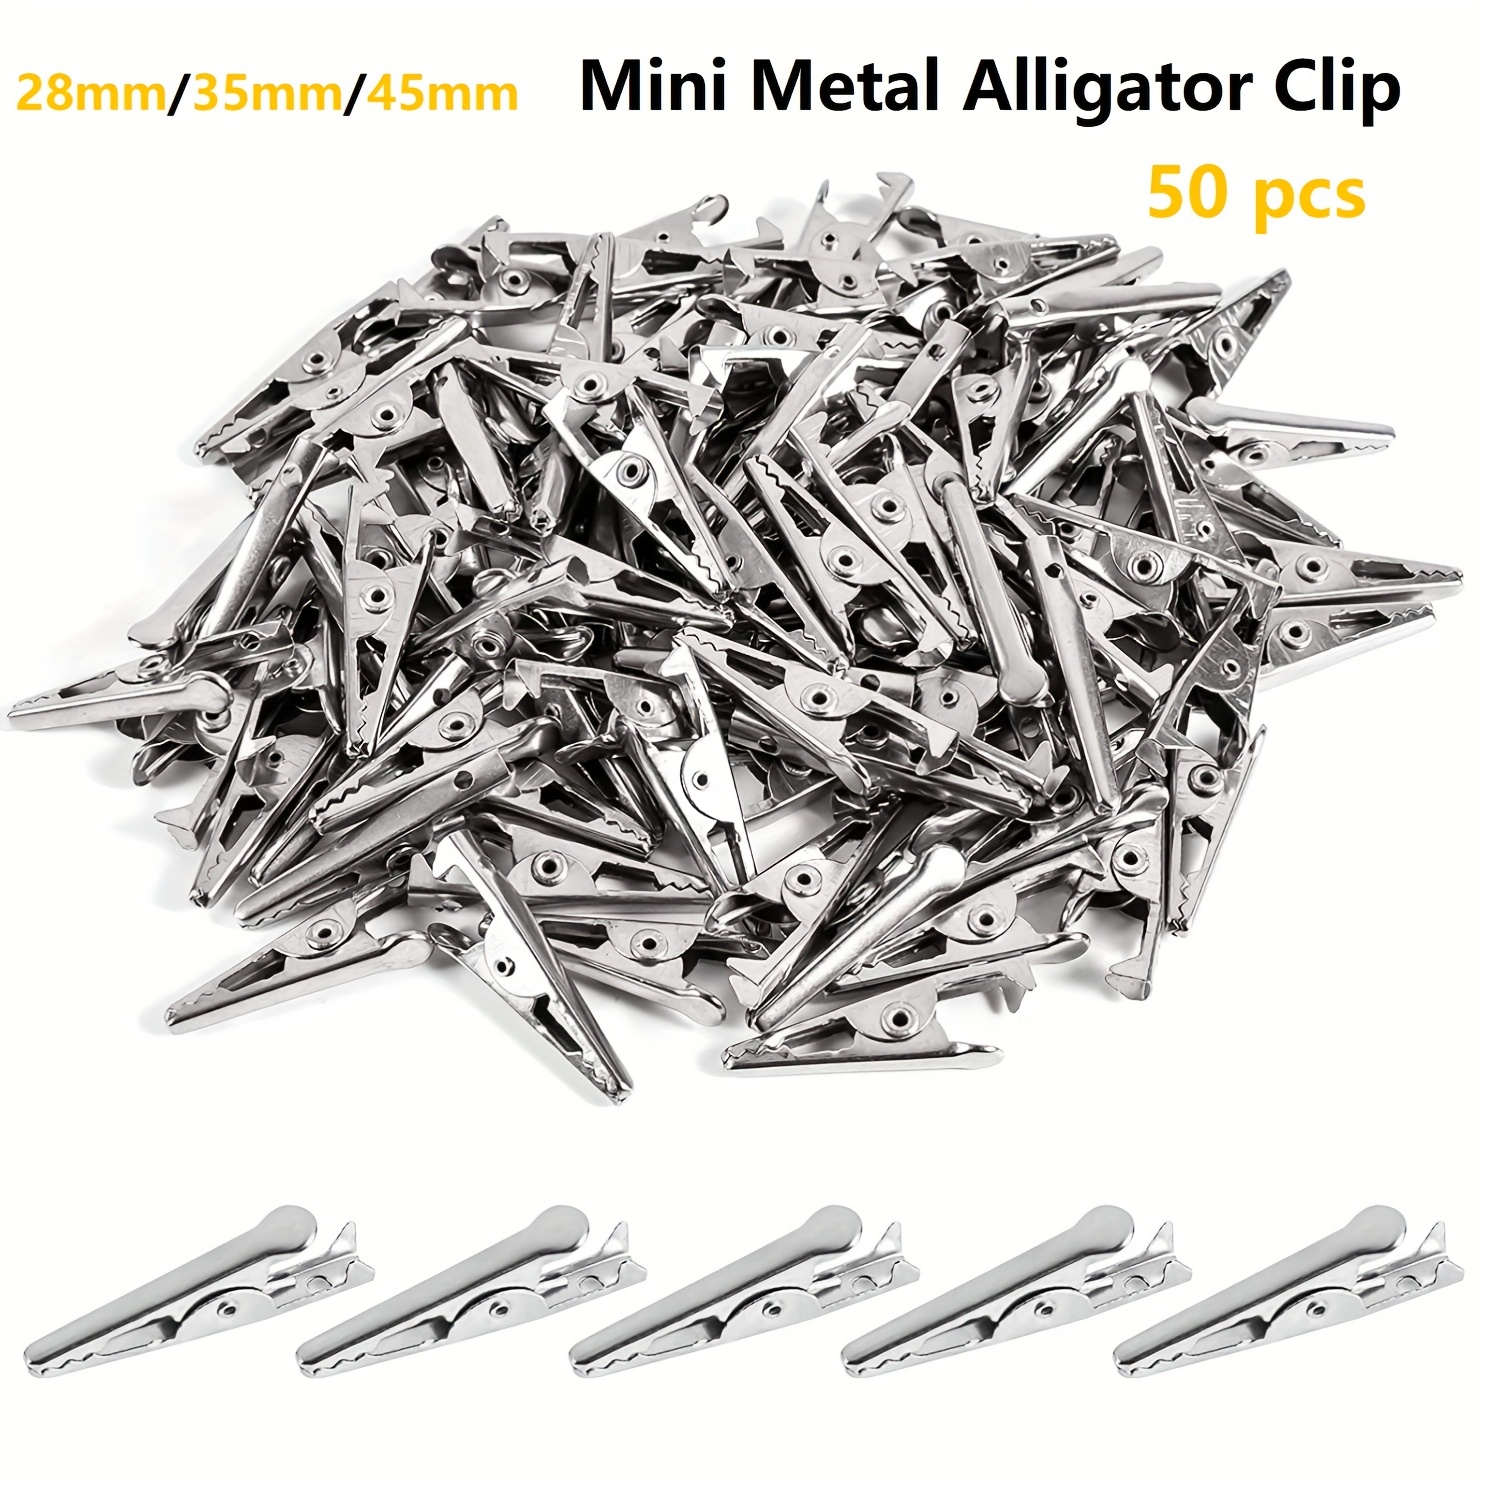 50pcs Mini Metal Alligator Clips - 28mm/35mm/45mm - Nickel Plated - For  Electric Testing & Cable Lead Clips